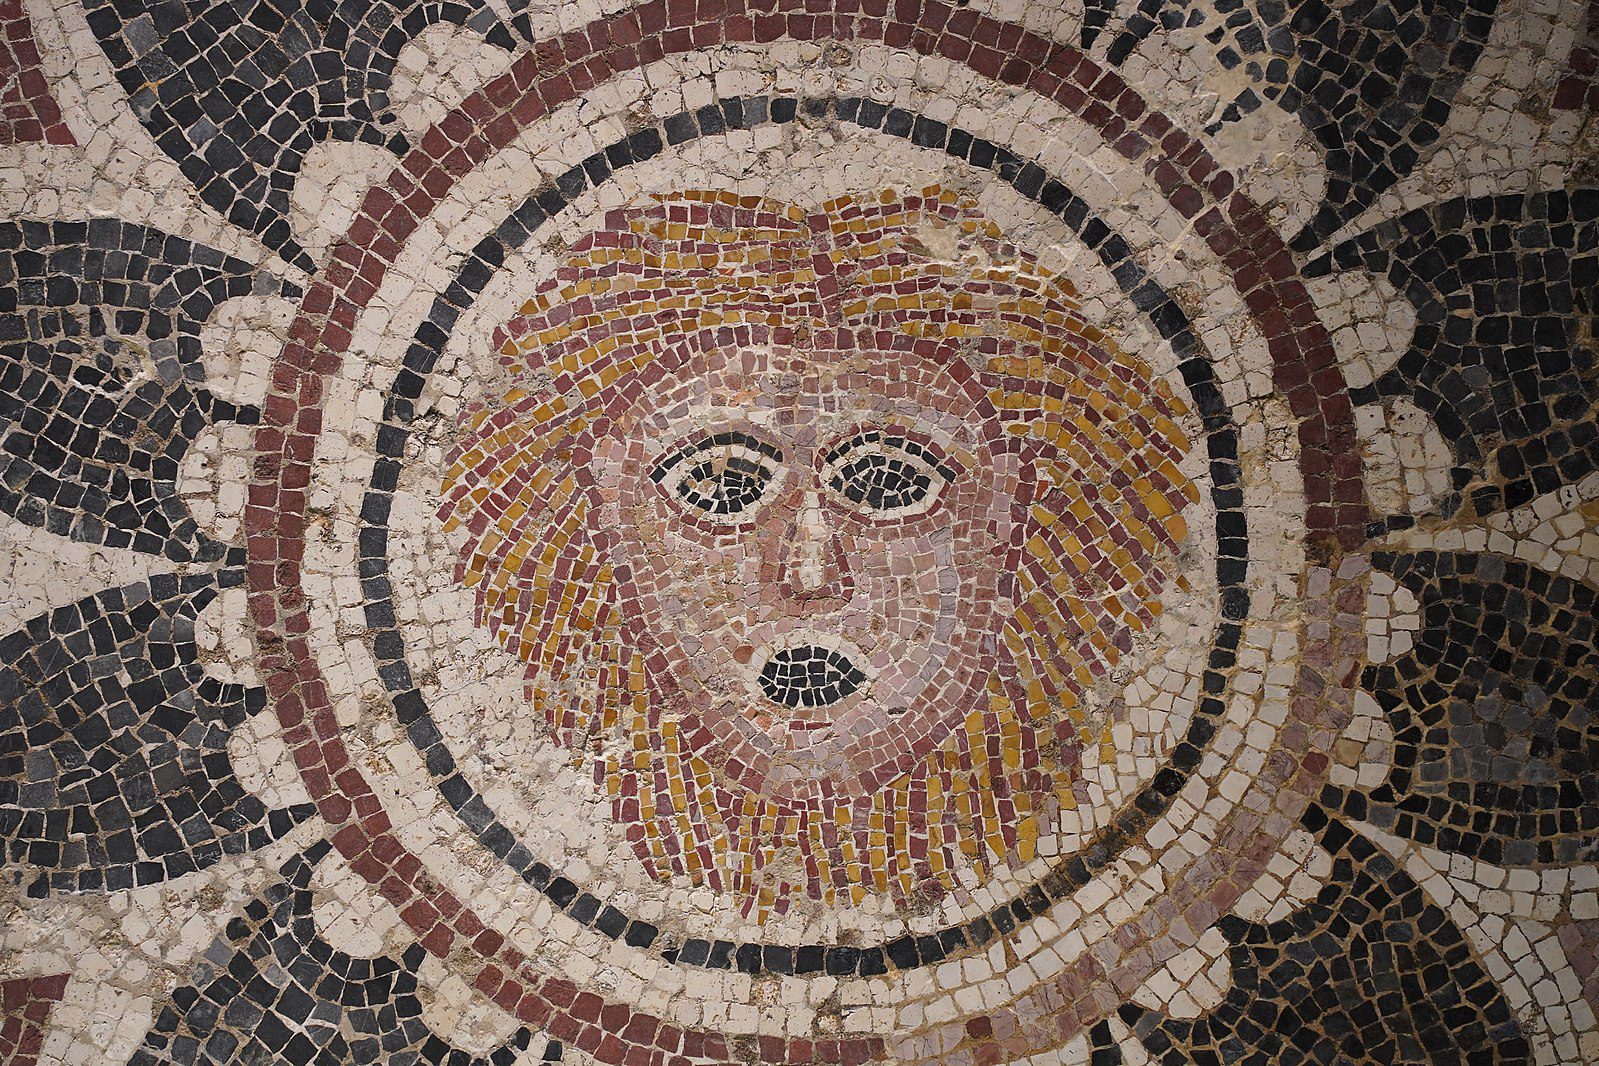 An ancient mosaic piece depicting Phobos, the god of fear and panic, dating back to 300-400 AD. Once nestled at the terminus of a corridor within a Roman villa in Bodrum (Halicarnassus).